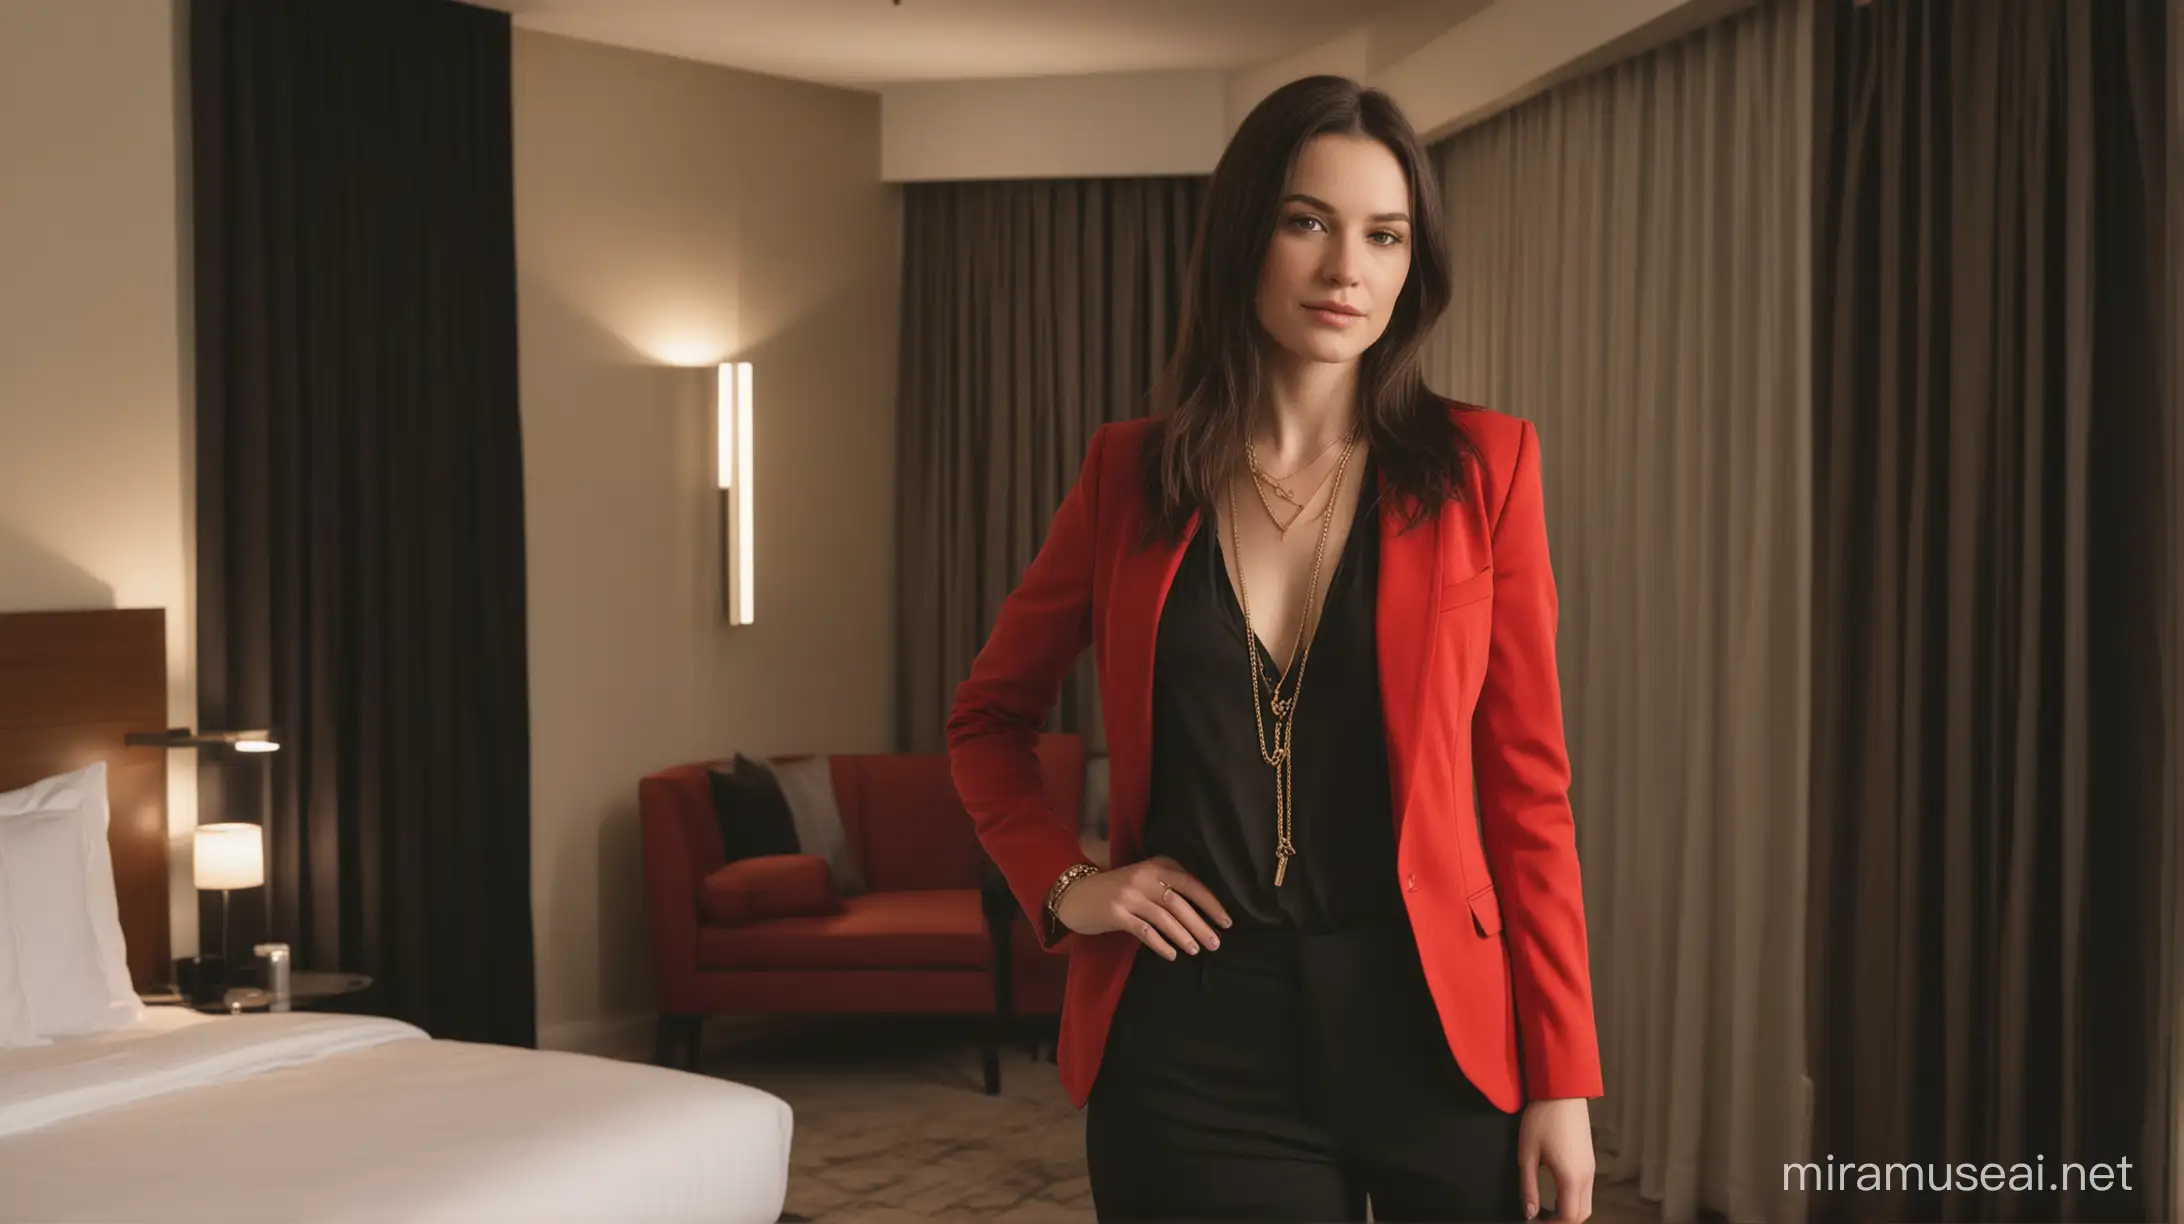 Stylish Woman in Modern HighRise Hotel Room at Dusk